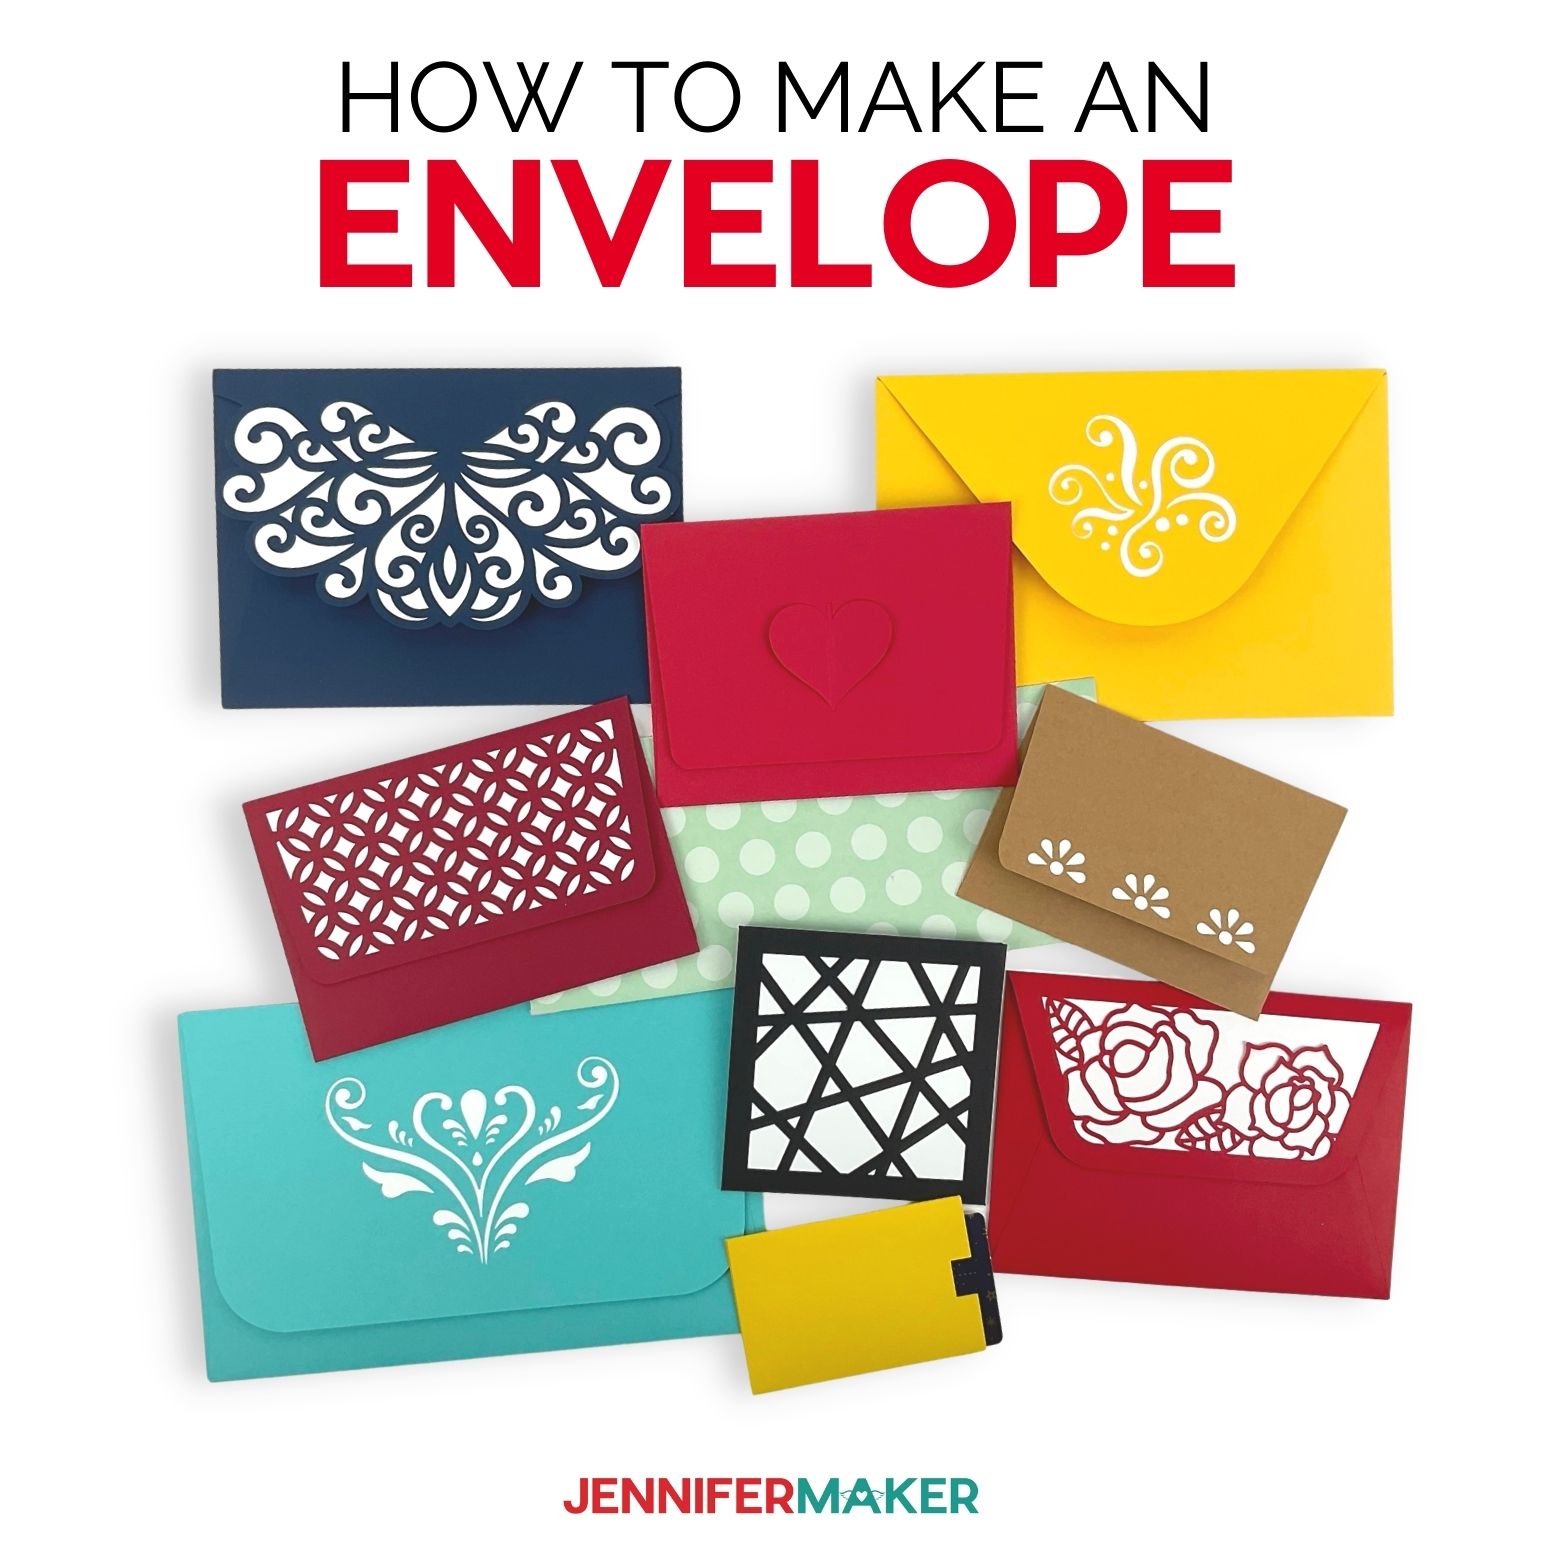 Ten handmade paper envelopes in bright colors on a white background below the title How to Make an Envelope.